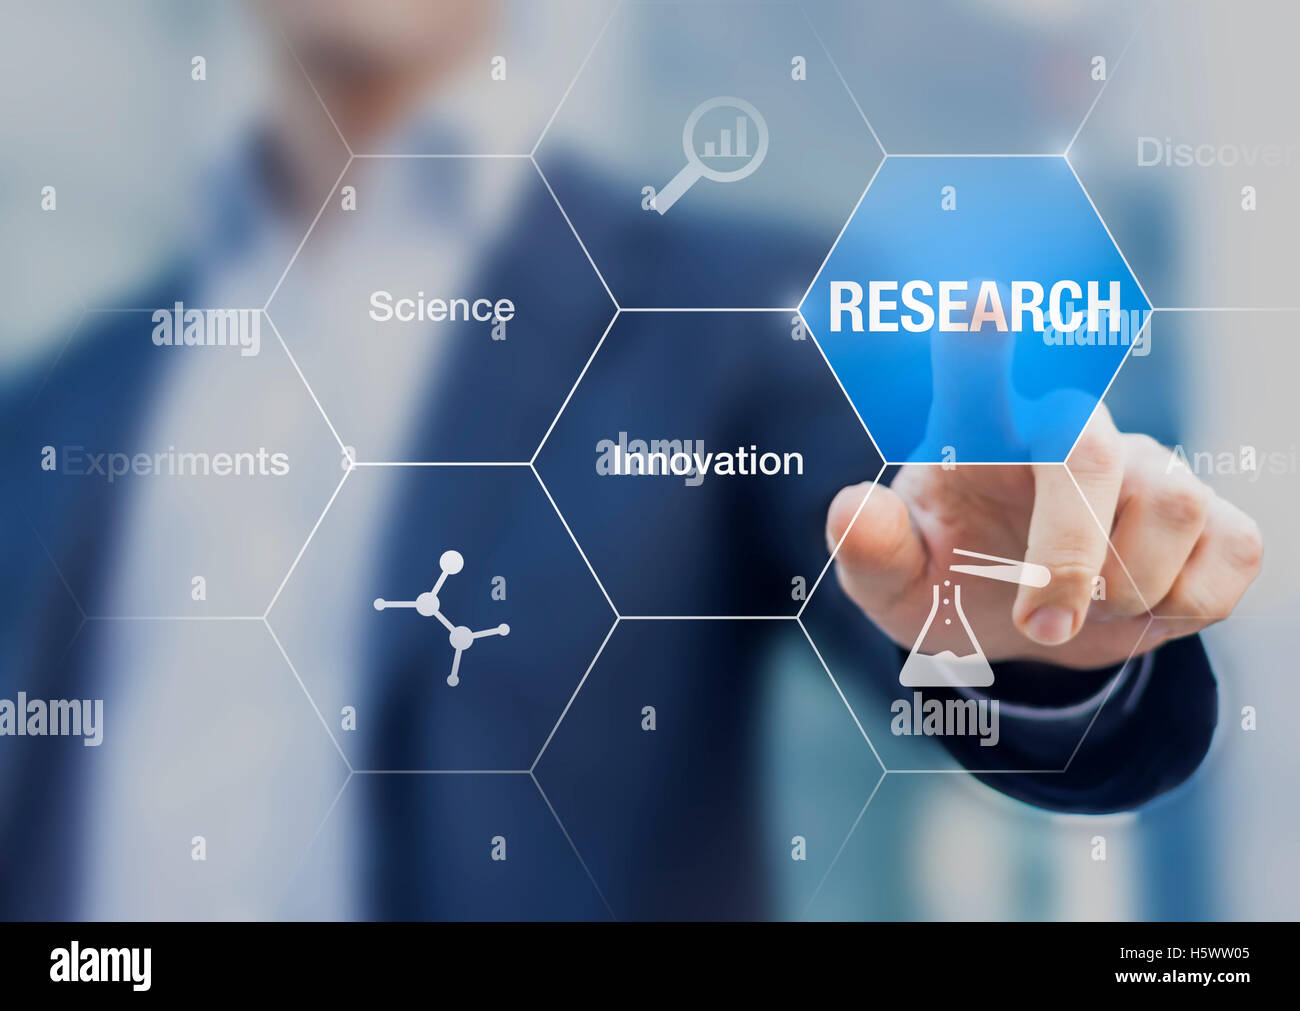 Businessman presenting concept about research, innovation and experiments, hand touching a button on virtual screen and icons Stock Photo